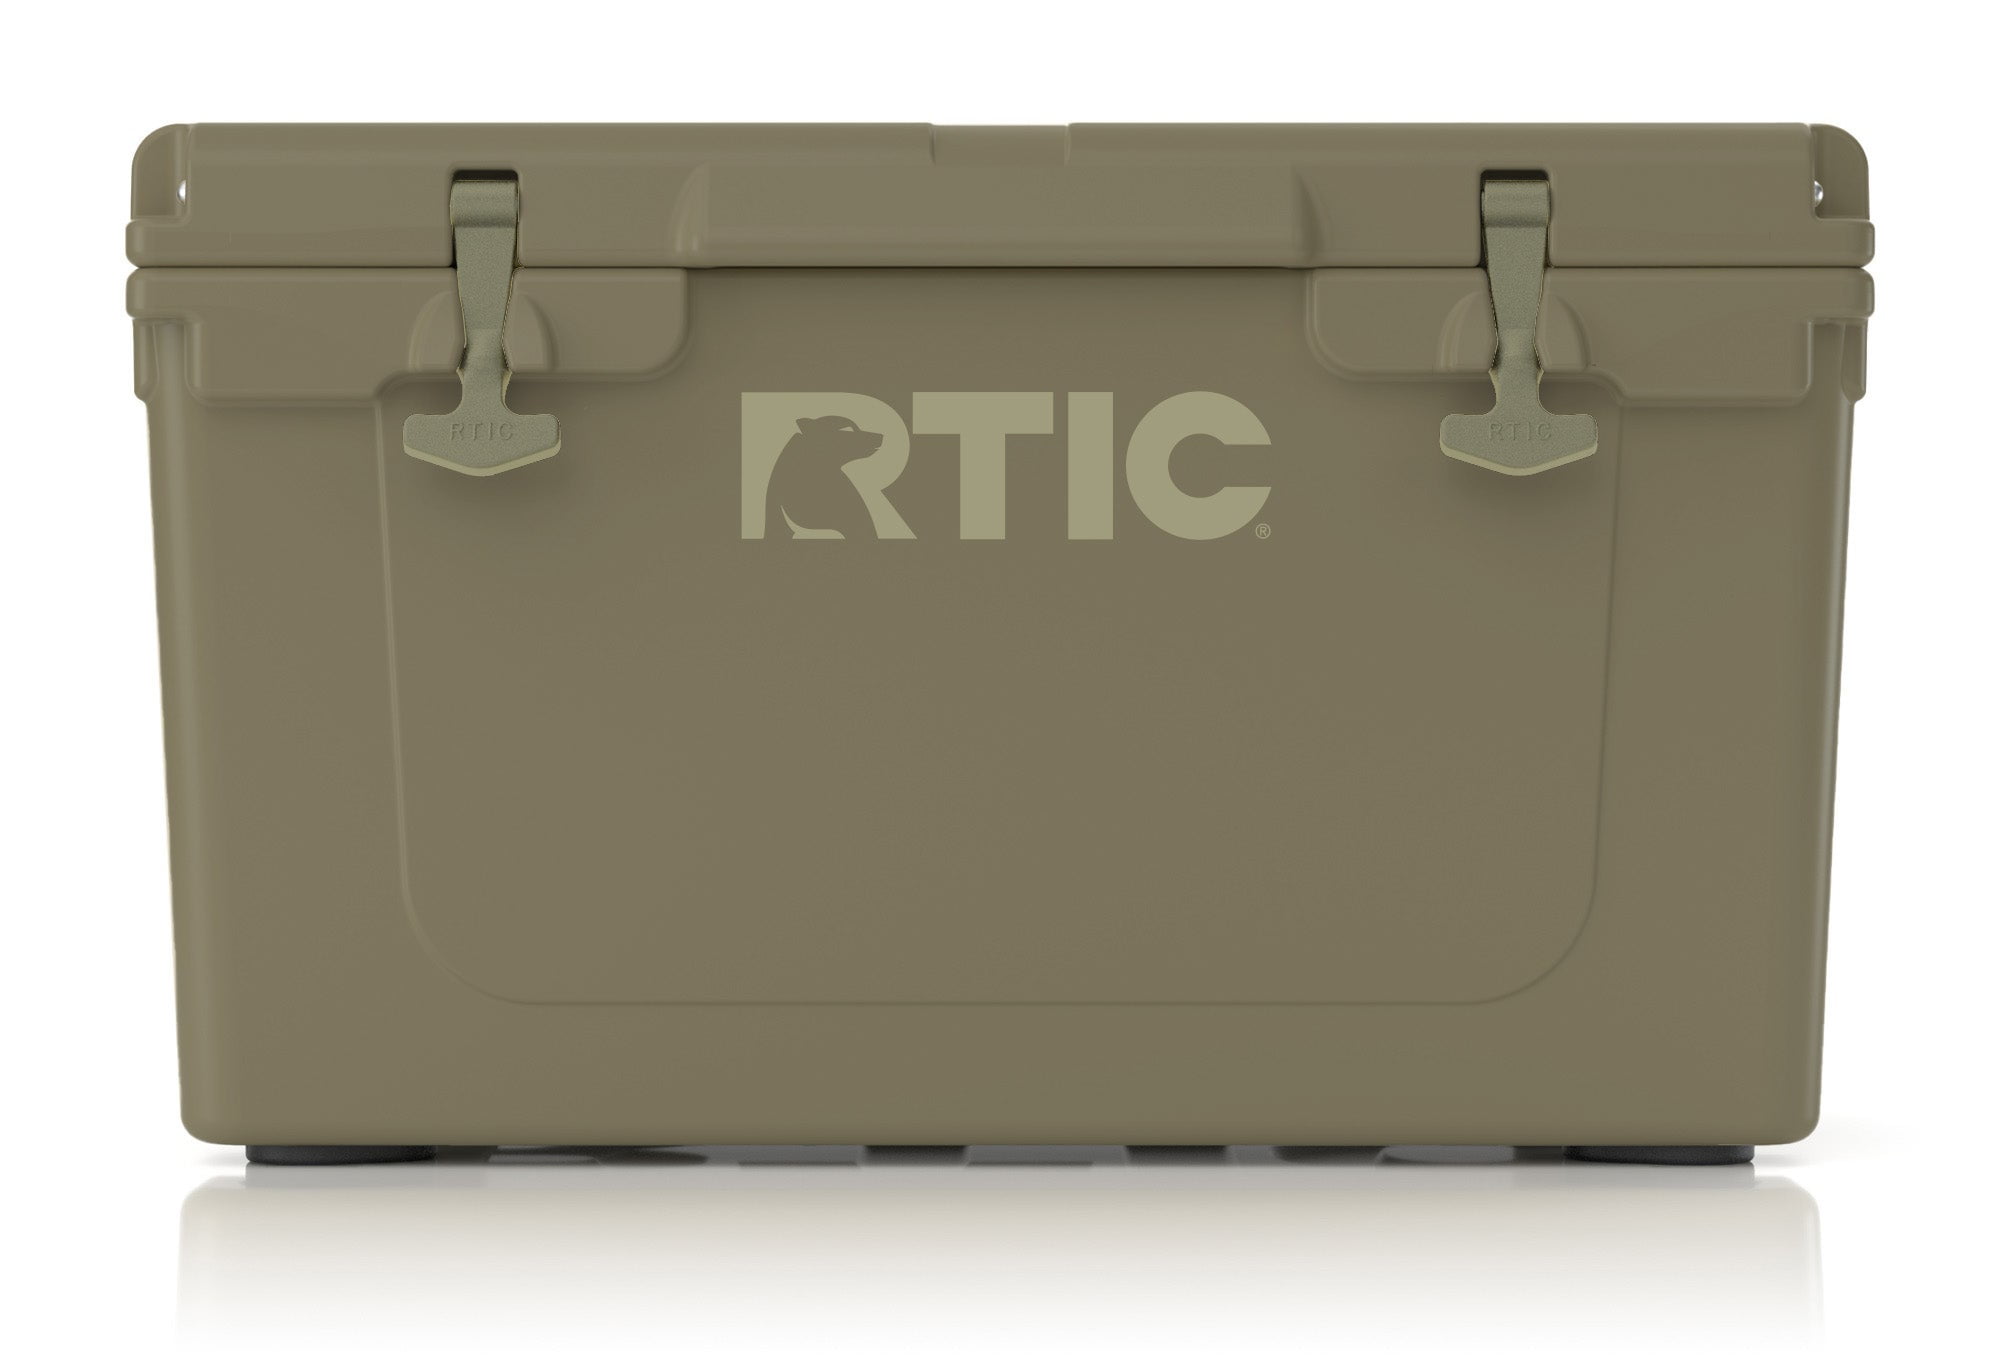 RTIC 45 qt Ultra-Tough Cooler, Insulated Portable Ice Chest for Beach, Drink, Beverage, Camping, Picnic, Fishing, Boat, Barbecue, Olive